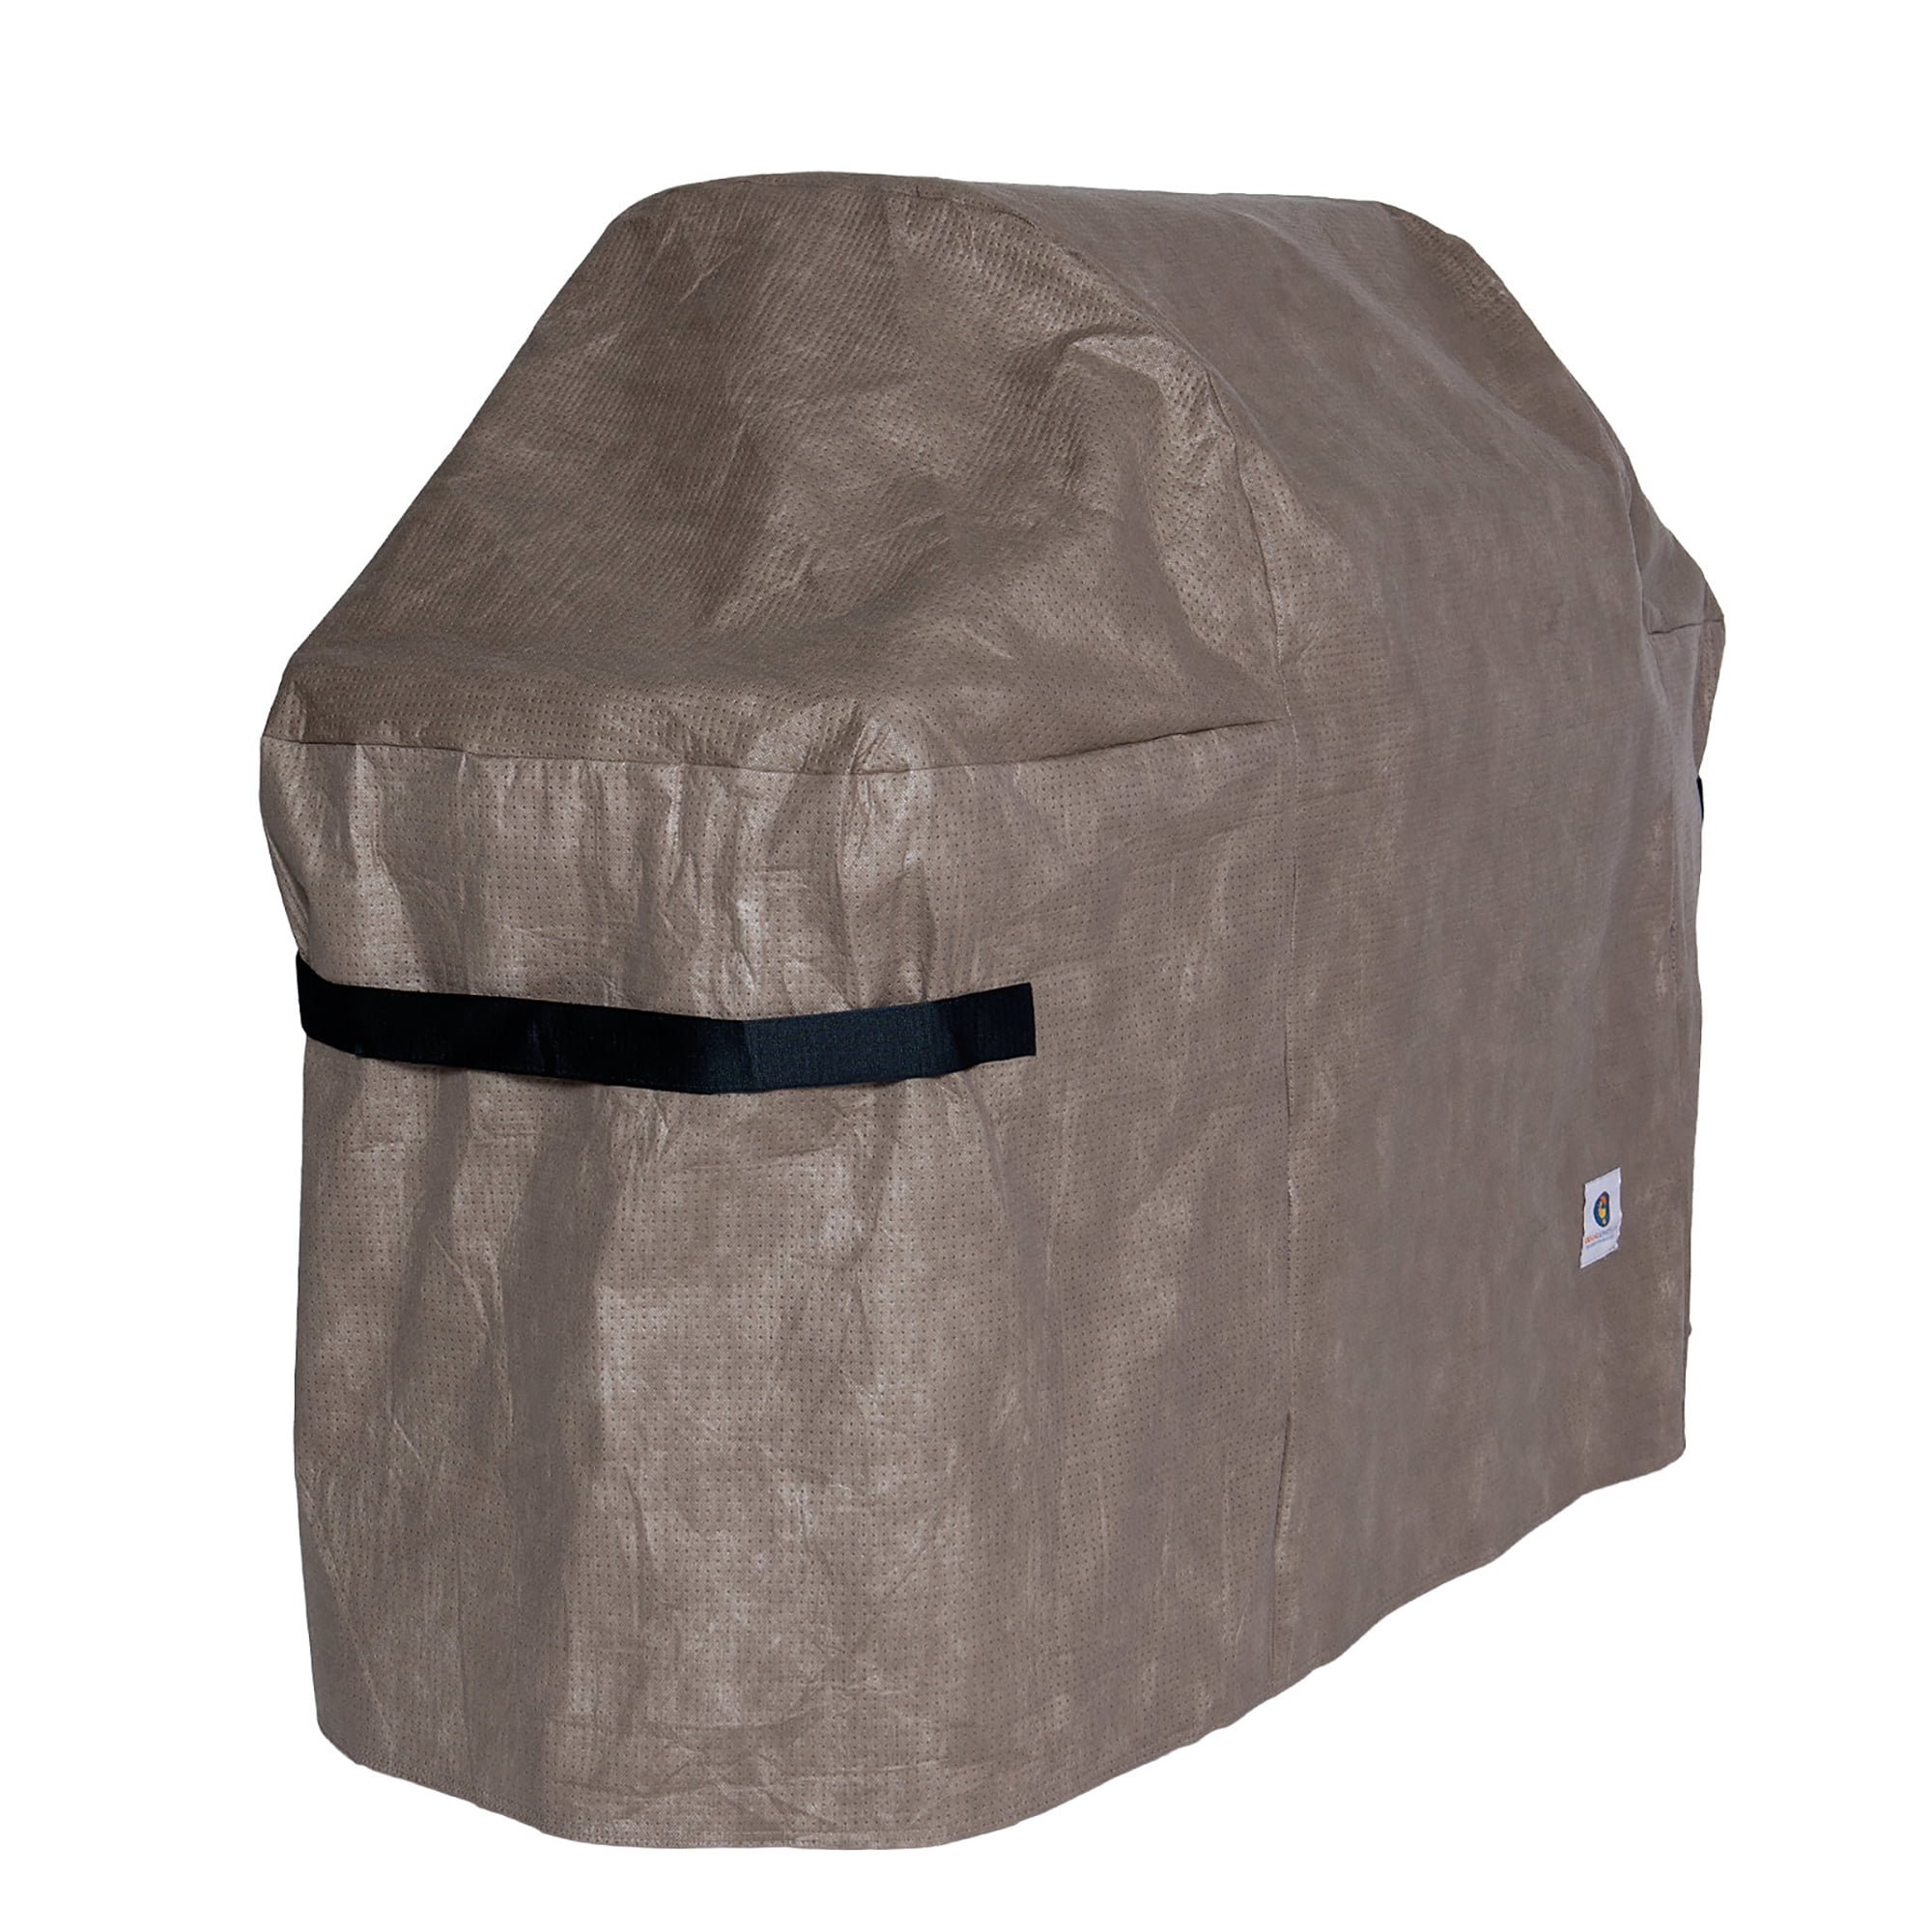 BBQ Grill Cover Weatherproof Heavy Duty Outdoor Protector Large Grey 